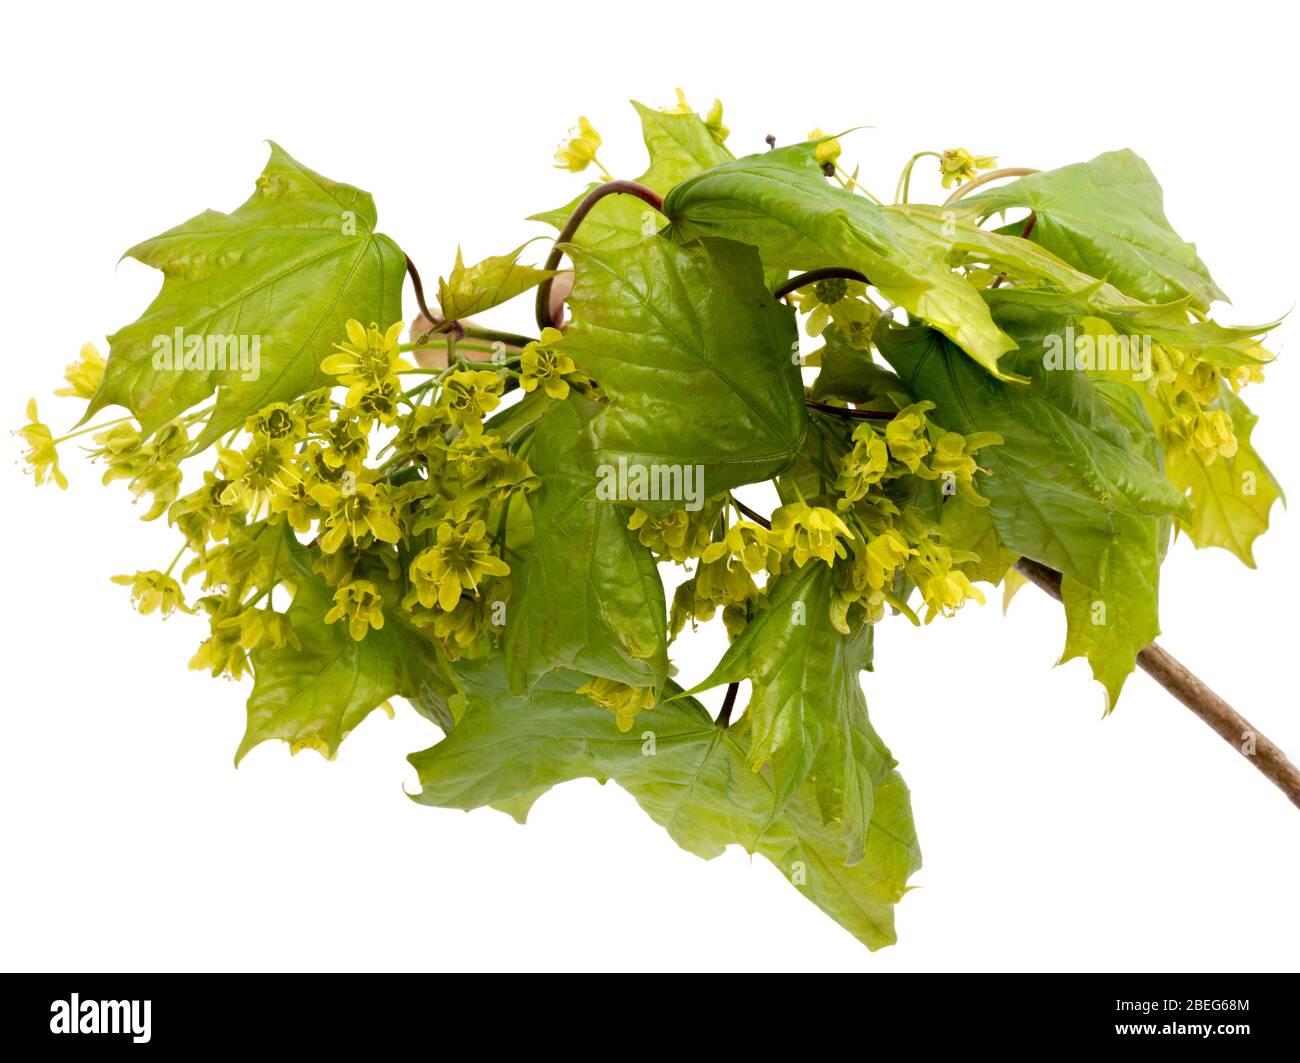 Yellow spring flowers of the UK native field maple, Acer campestre, contrast with fresh green foliage against a white background Stock Photo